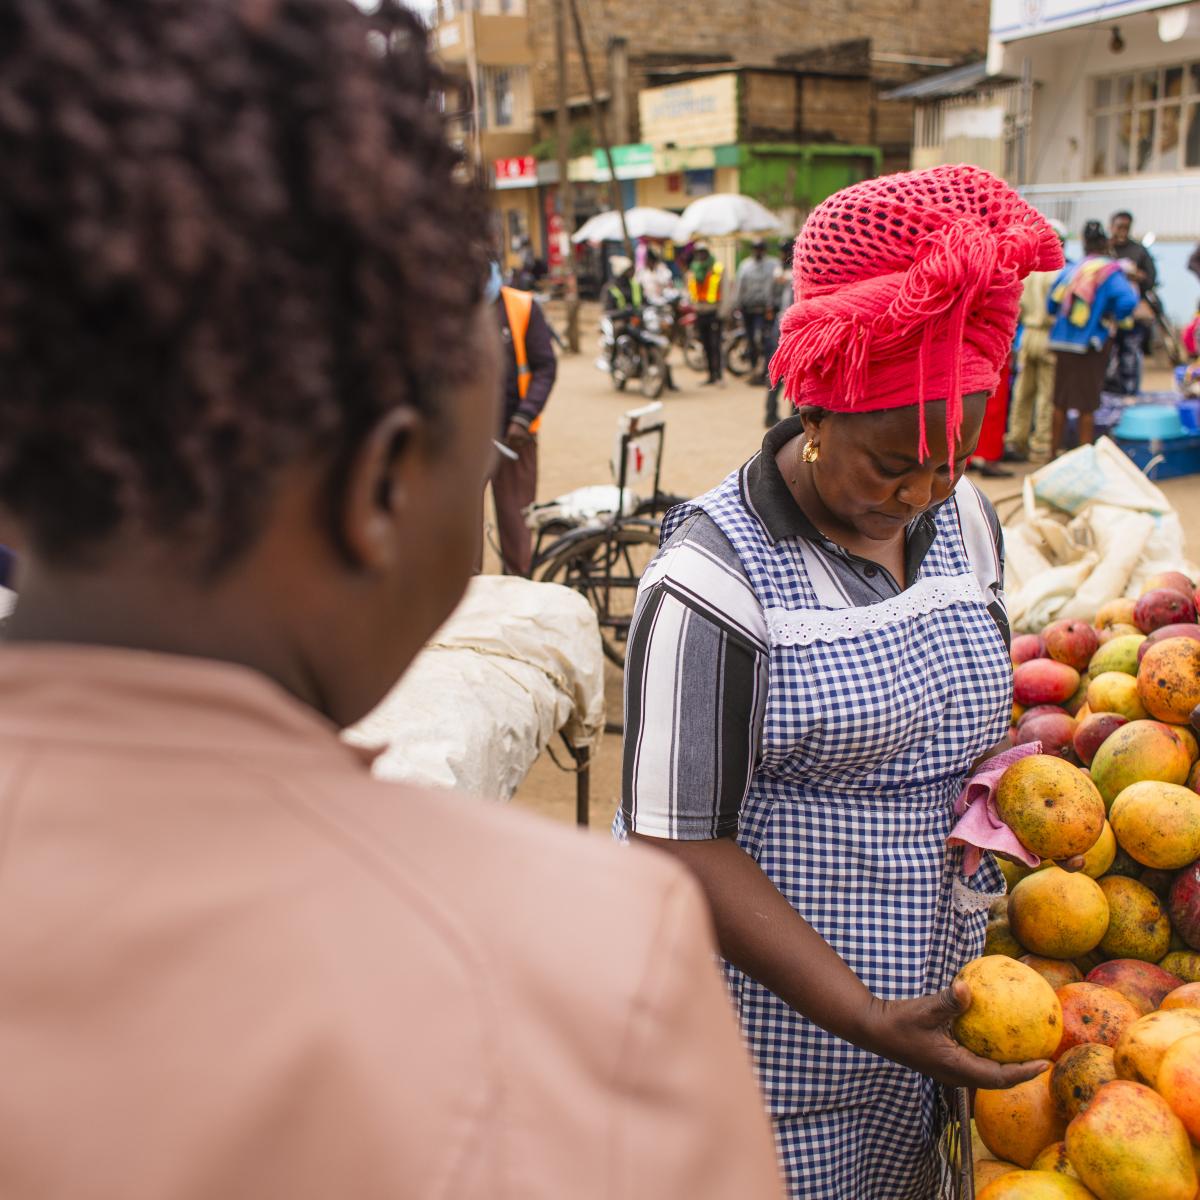 A woman with her back to the camera inspects fruit while another woman prepares her order.